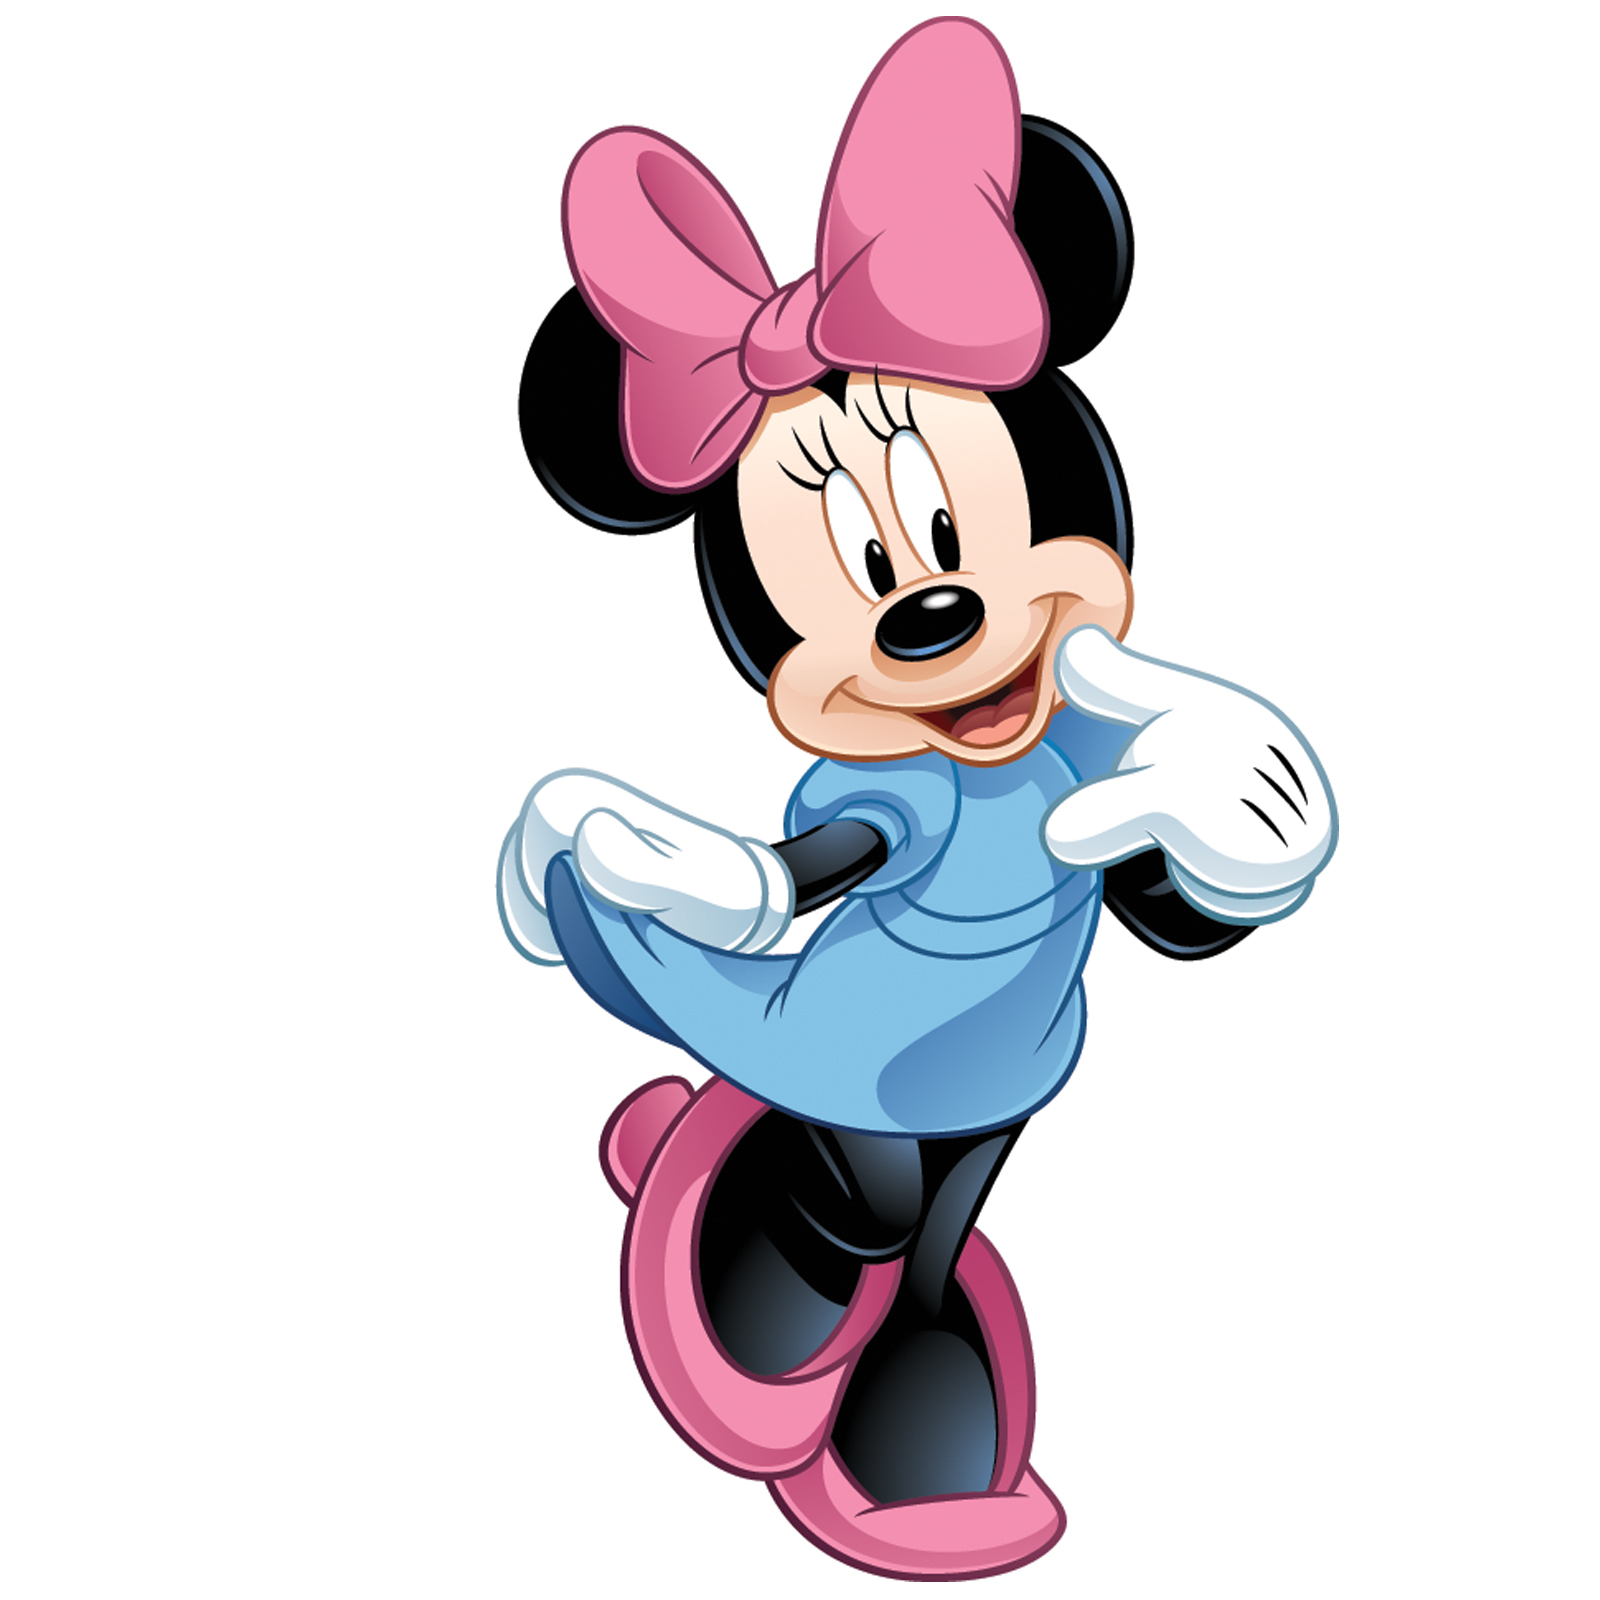 1000+ images about Minnie - Poses